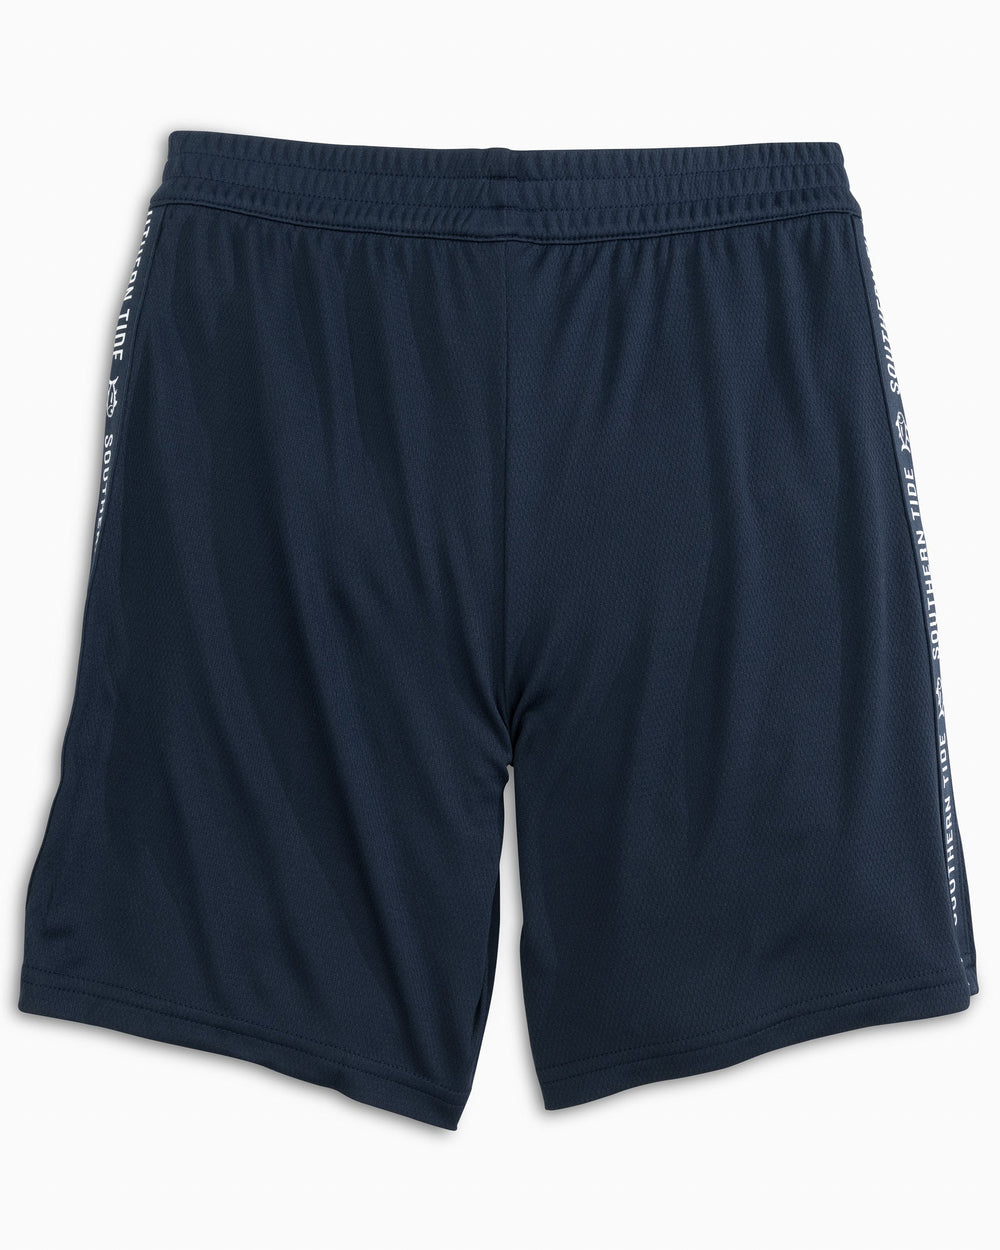 The back view of the Kid's Melink Short by Southern Tide - True Navy